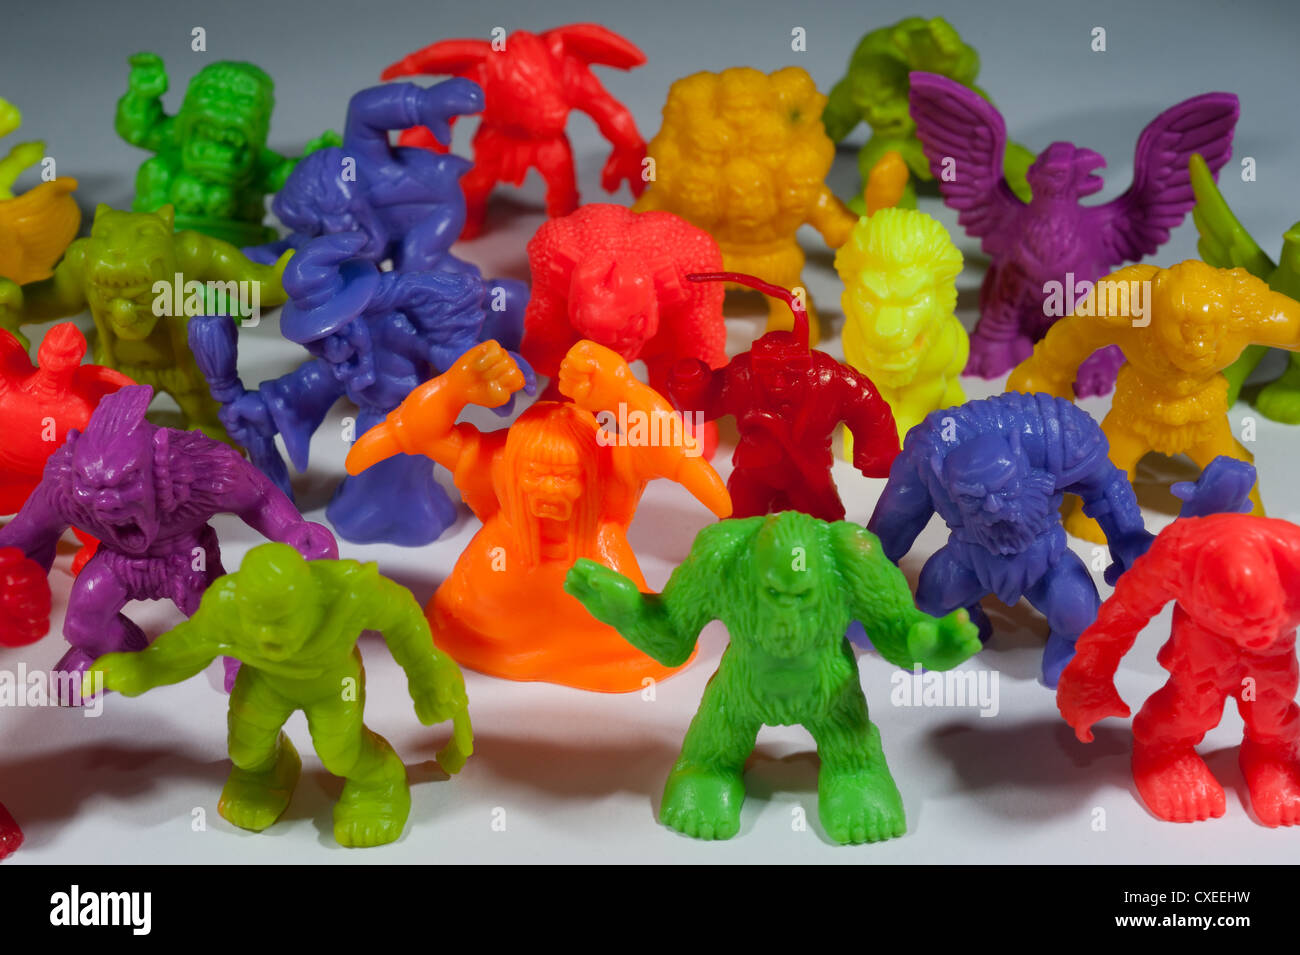 Monster In My Pocket Figures Stock Photo 50720597 Alamy